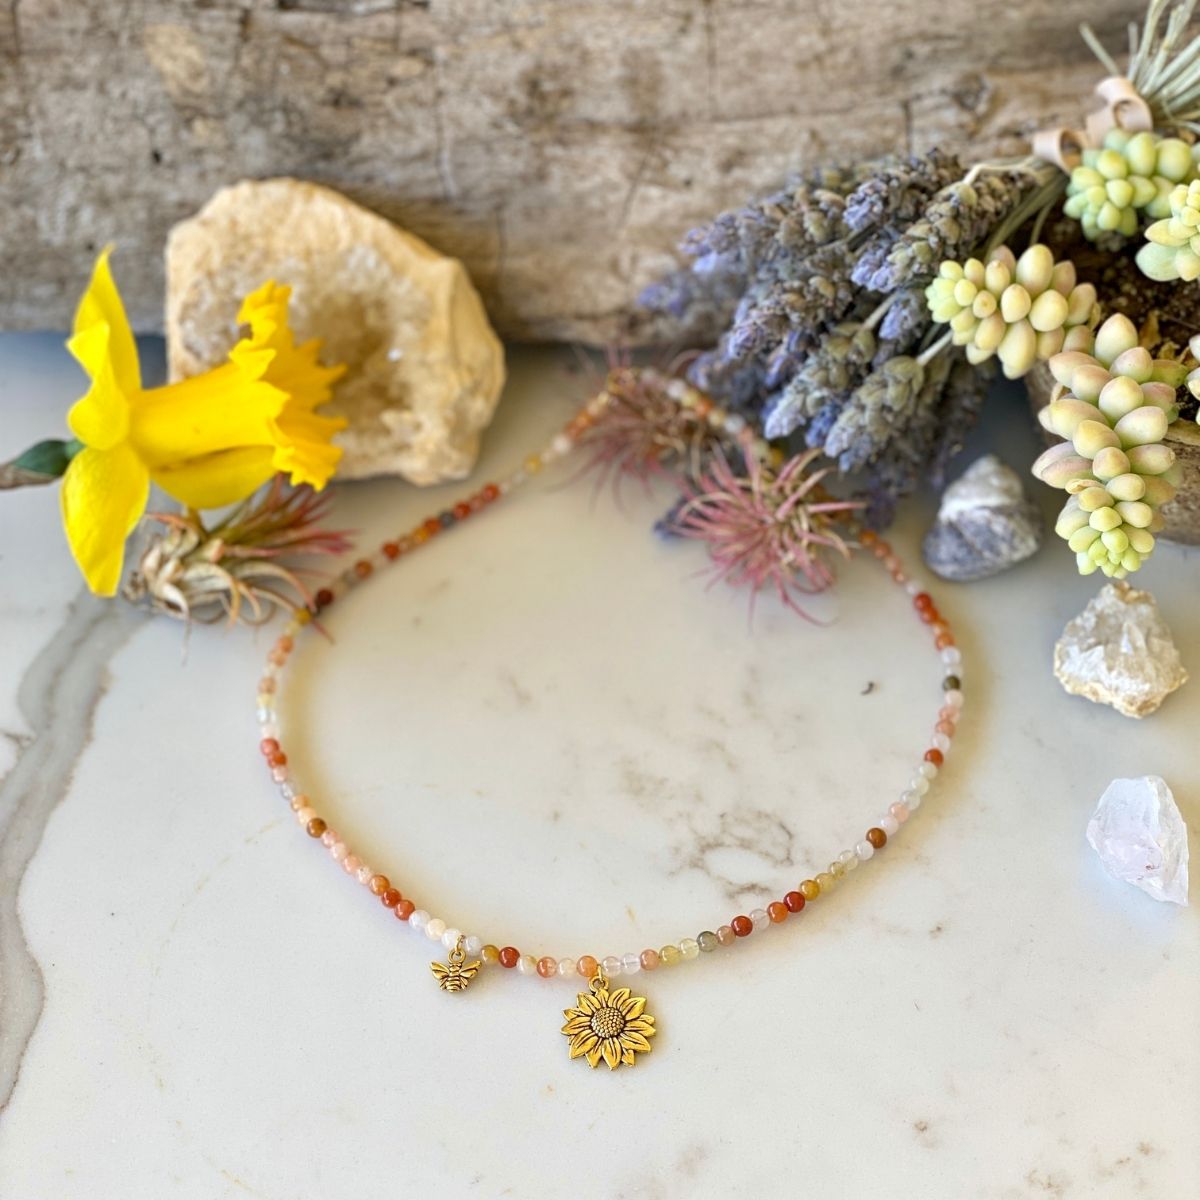 Bee Happy Necklace with colorful Jade. The bracelet is adorned with a playful bee and sunflower charms to help you live happy.